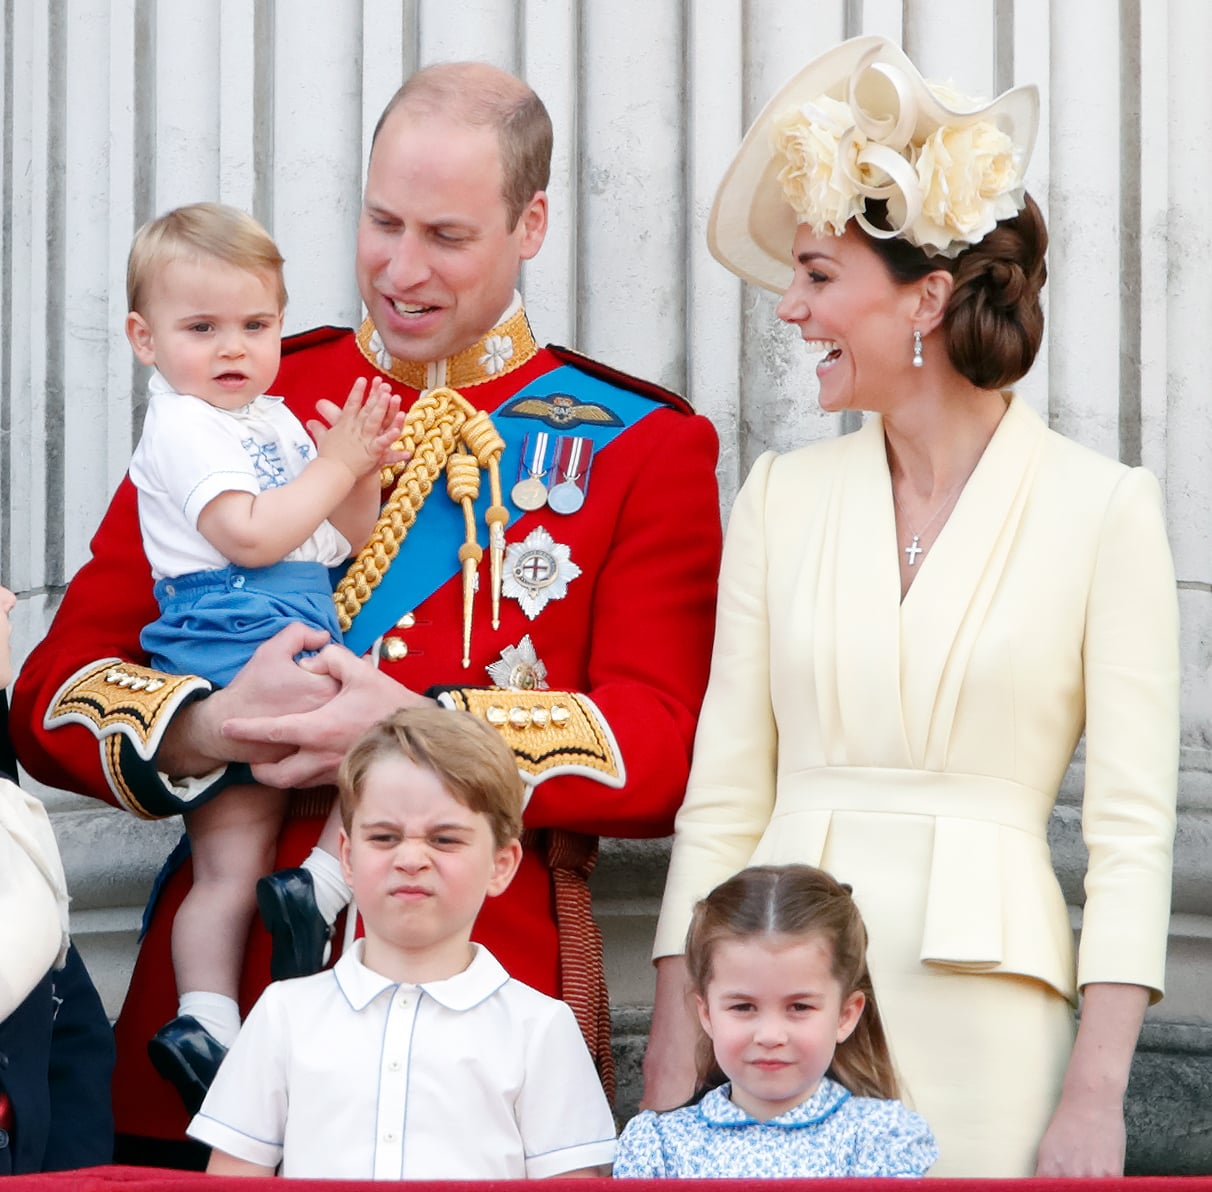 LONDON, UNITED KINGDOM - JUNE 08: (EMBARGOED FOR PUBLICATION IN UK NEWSPAPERS UNTIL 24 HOURS AFTER CREATE DATE AND TIME) Prince William, Duke of Cambridge, Catherine, Duchess of Cambridge, Prince Louis of Cambridge, Prince George of Cambridge and Princess Charlotte of Cambridge stand on the balcony of Buckingham Palace during Trooping The Colour, the Queen's annual birthday parade, on June 8, 2019 in London, England. The annual ceremony involving over 1400 guardsmen and cavalry, is believed to have first been performed during the reign of King Charles II. The parade marks the official birthday of the Sovereign, although the Queen's actual birthday is on April 21st. (Photo by Max Mumby/Indigo/Getty Images)